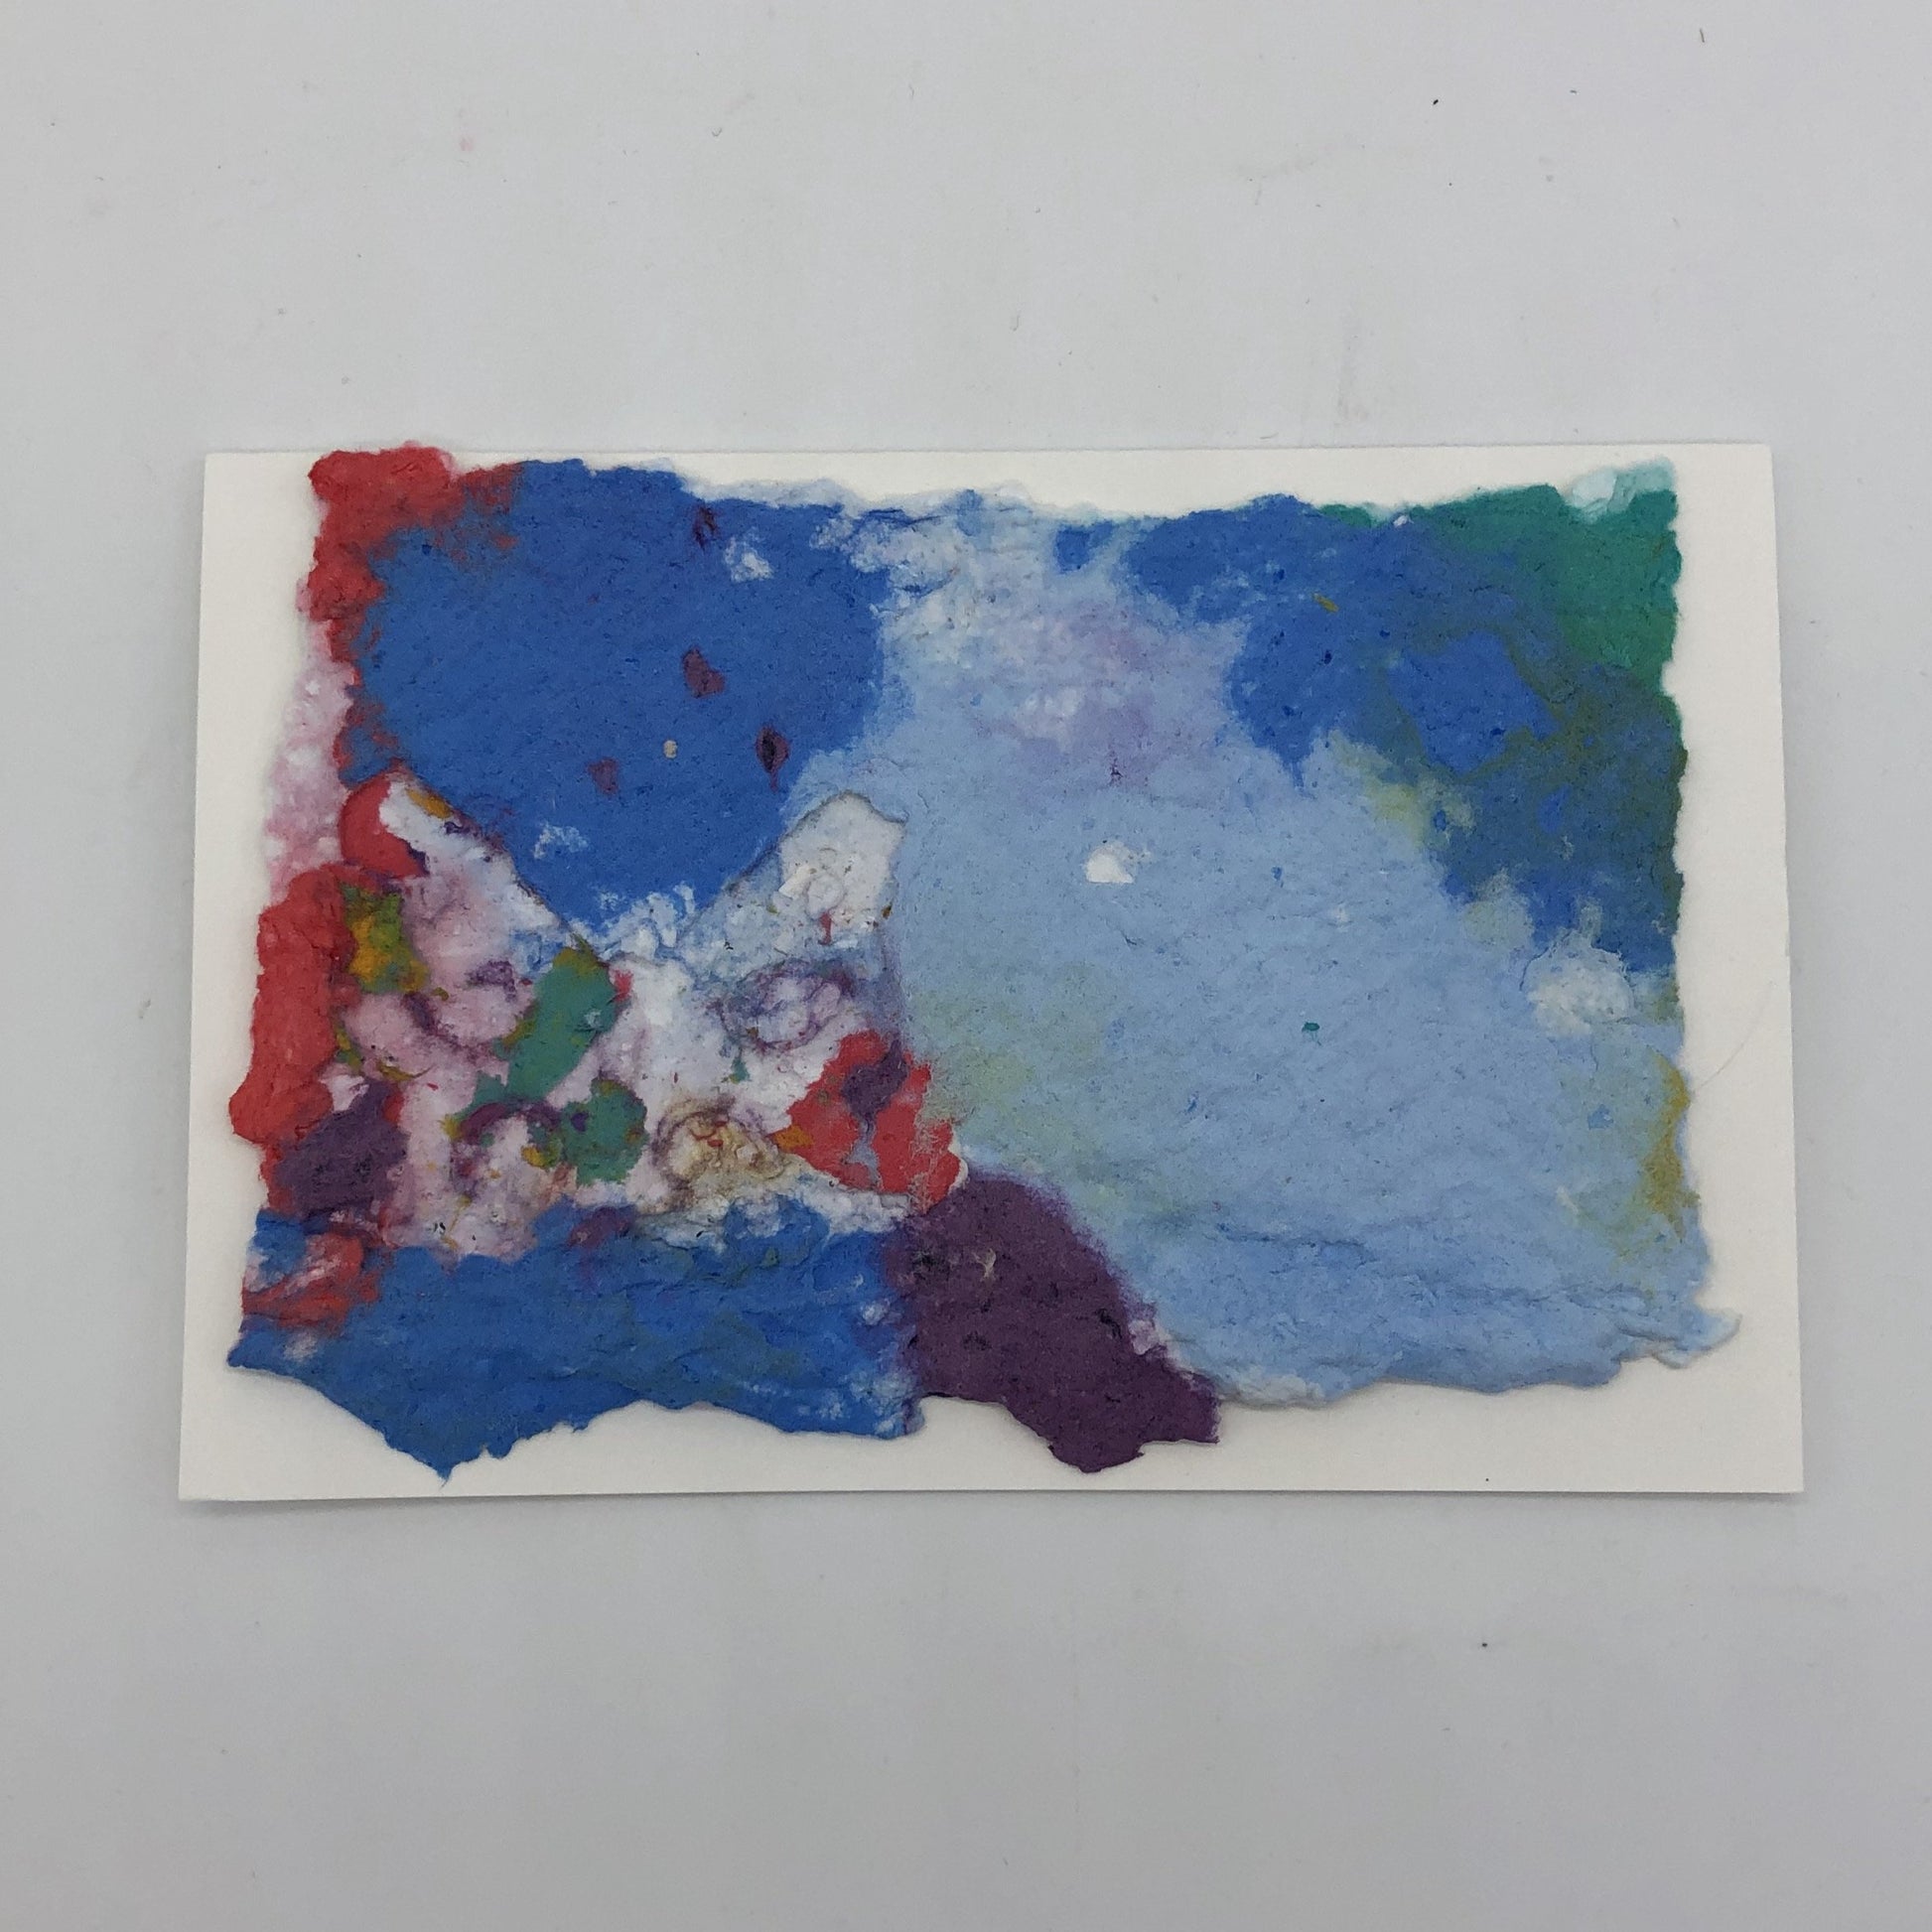 Handmade paper greeting card of blues, purple , red and green colors melted together in the background with a white small butterfly over top int the lower left hand corner